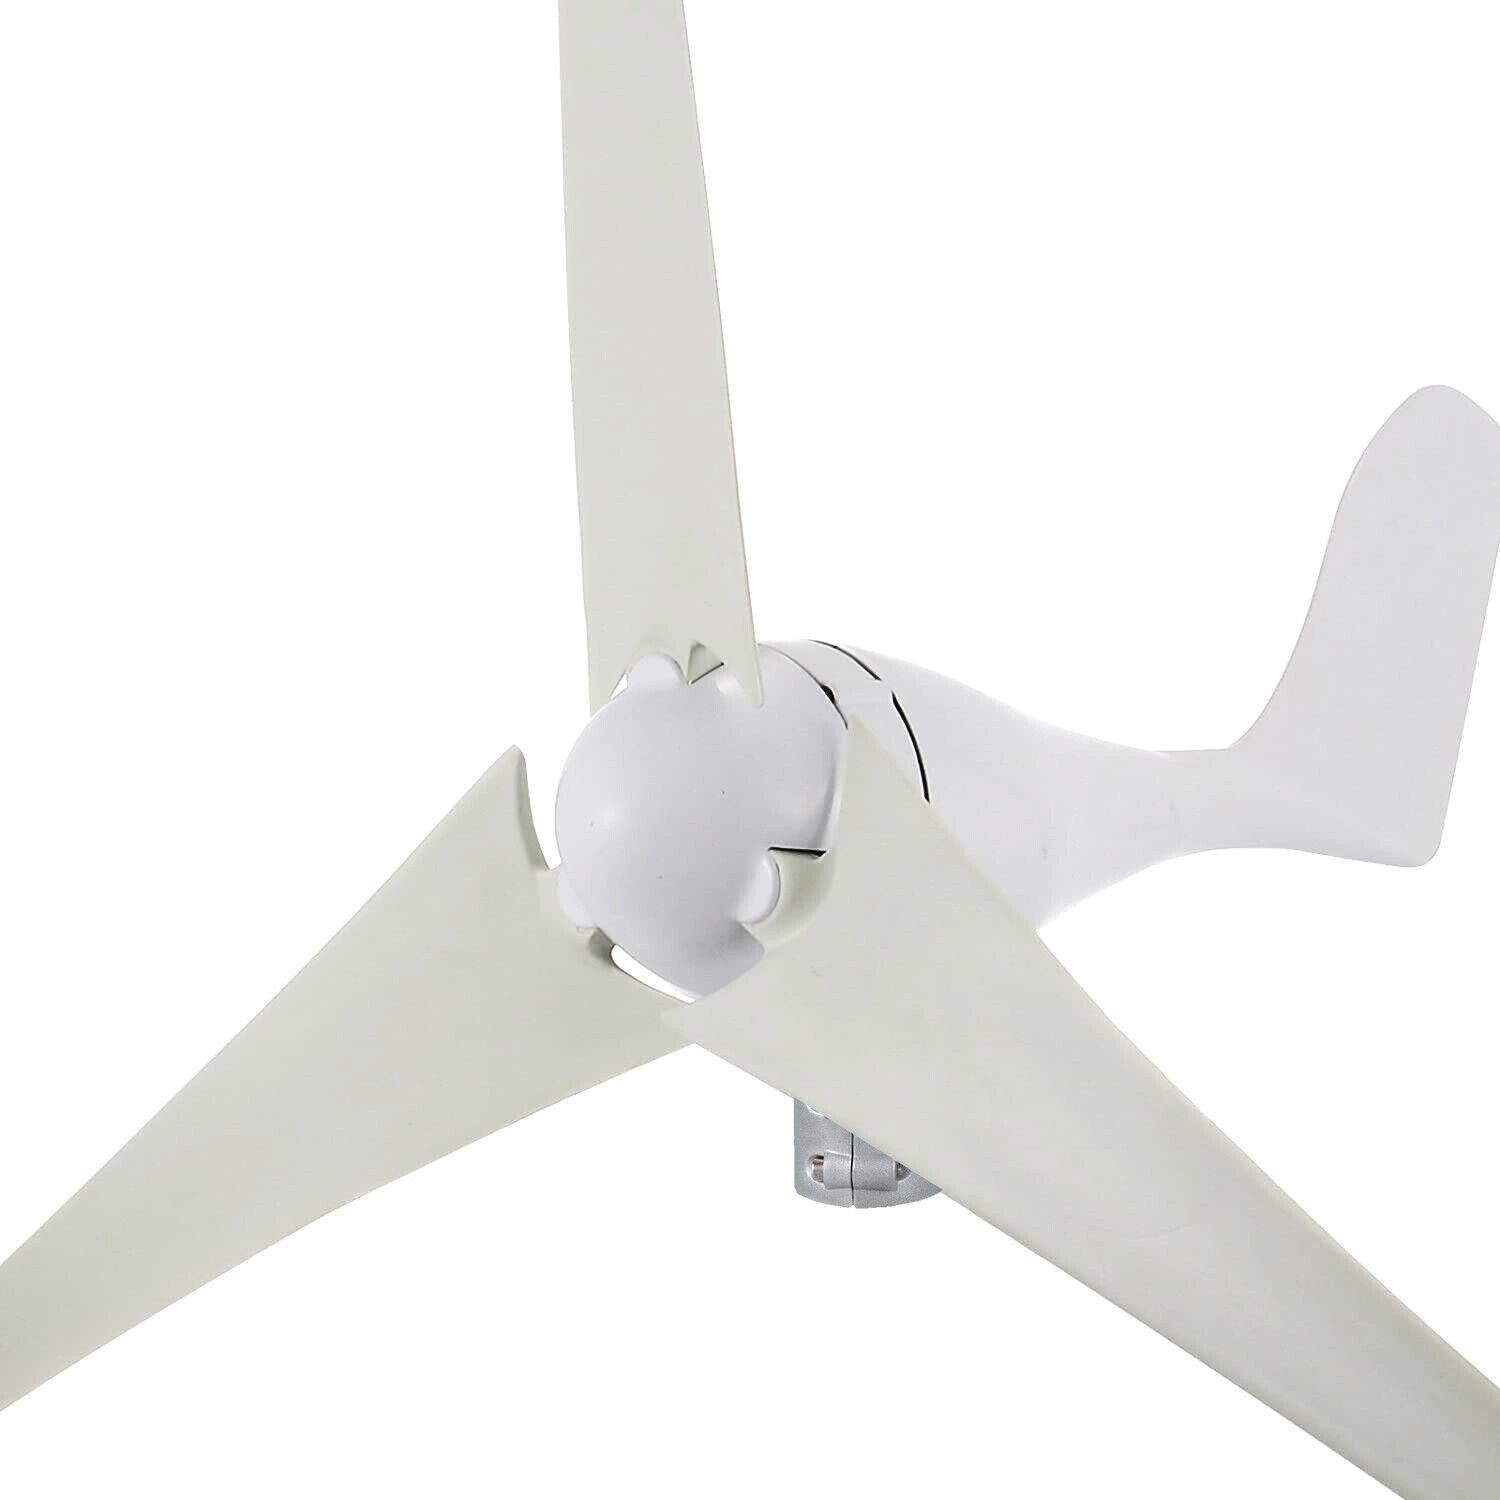 400W Wind Turbine Generator 20A Charger Environmental 3 Blades Windmill Power - Office Catch